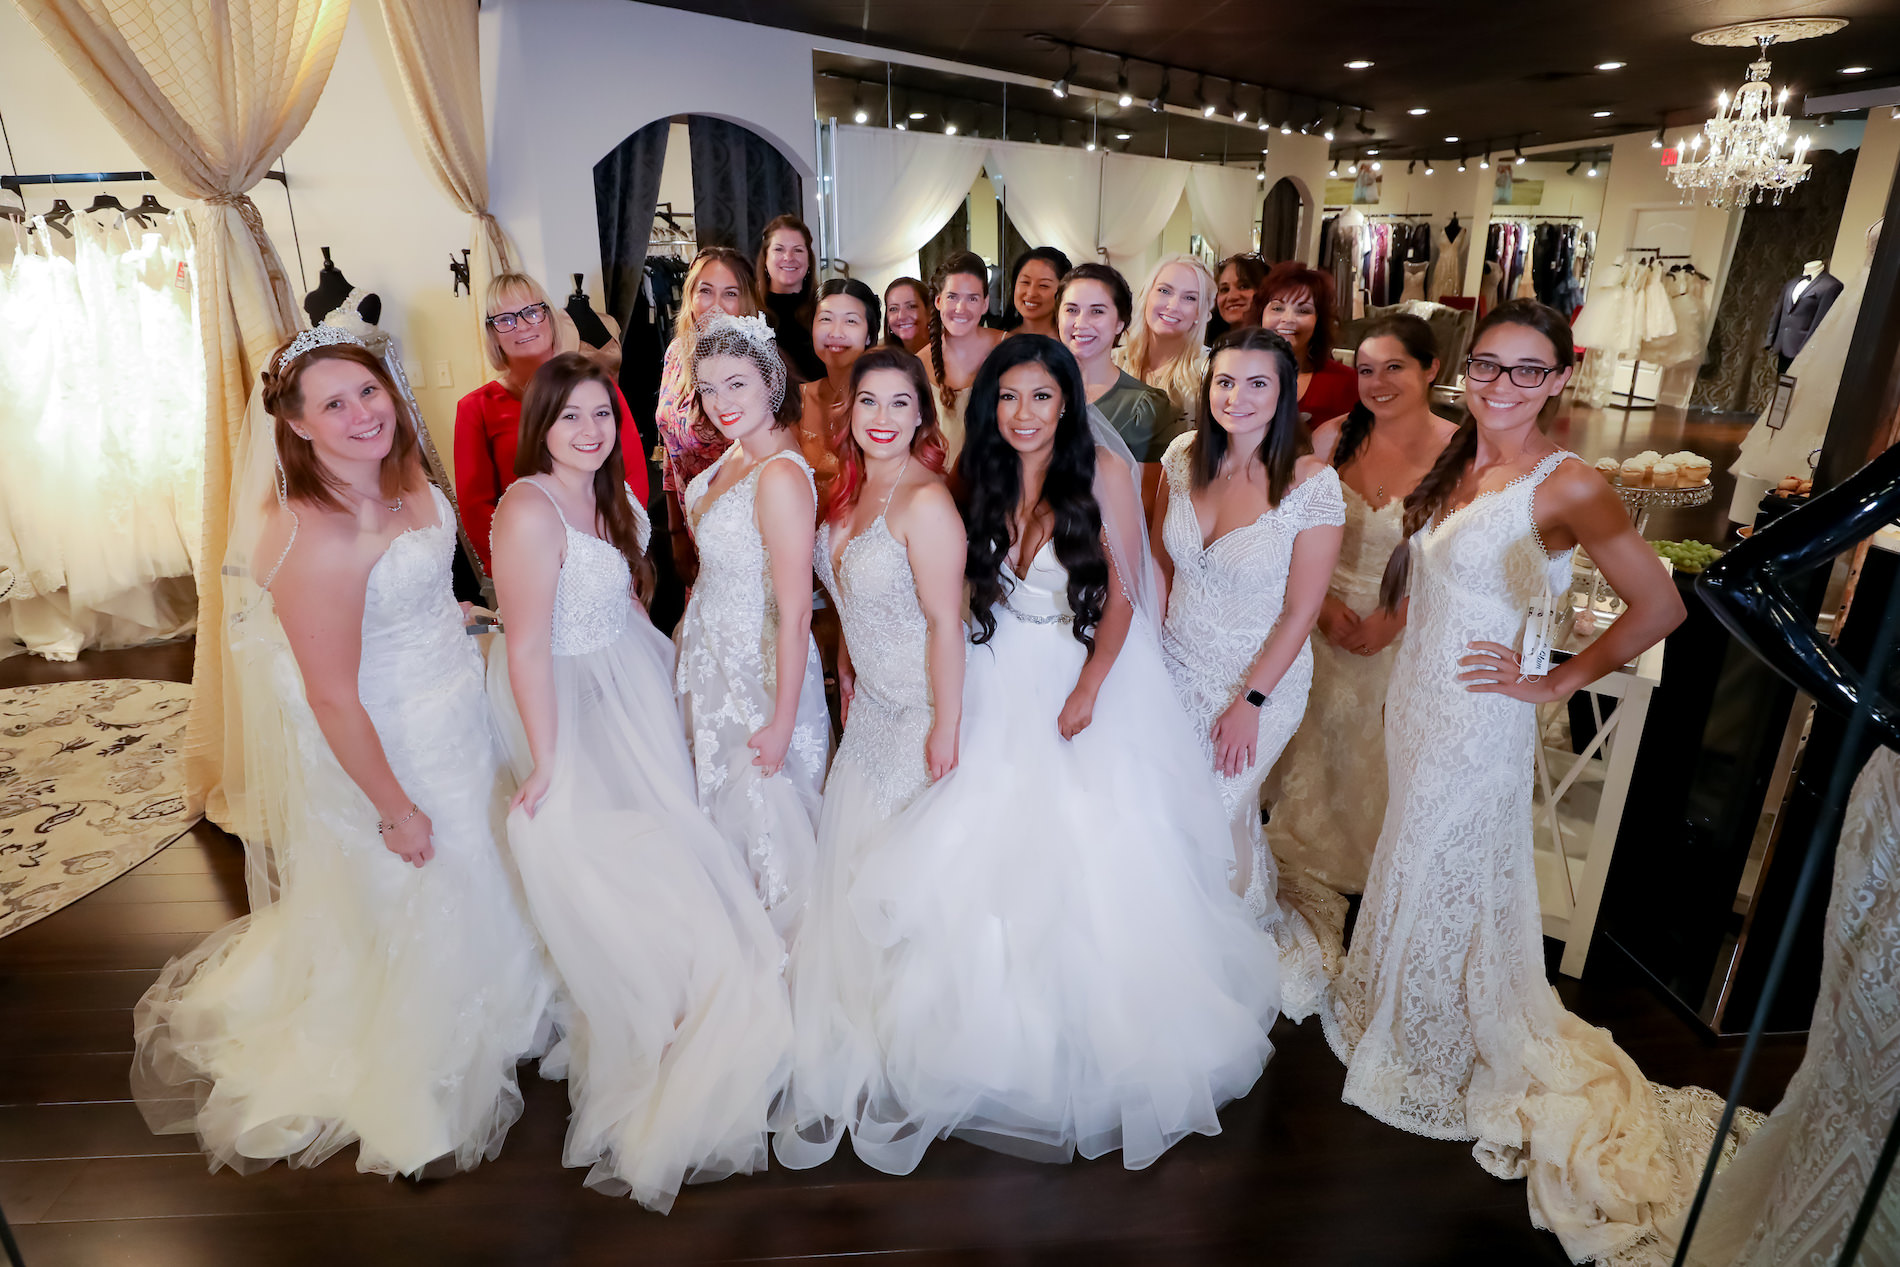 Marry Me Tampa Bay Before 5 Networking Event | Nikki's Glitz and Glam Bridal Boutique | Lifelong Photography Studio